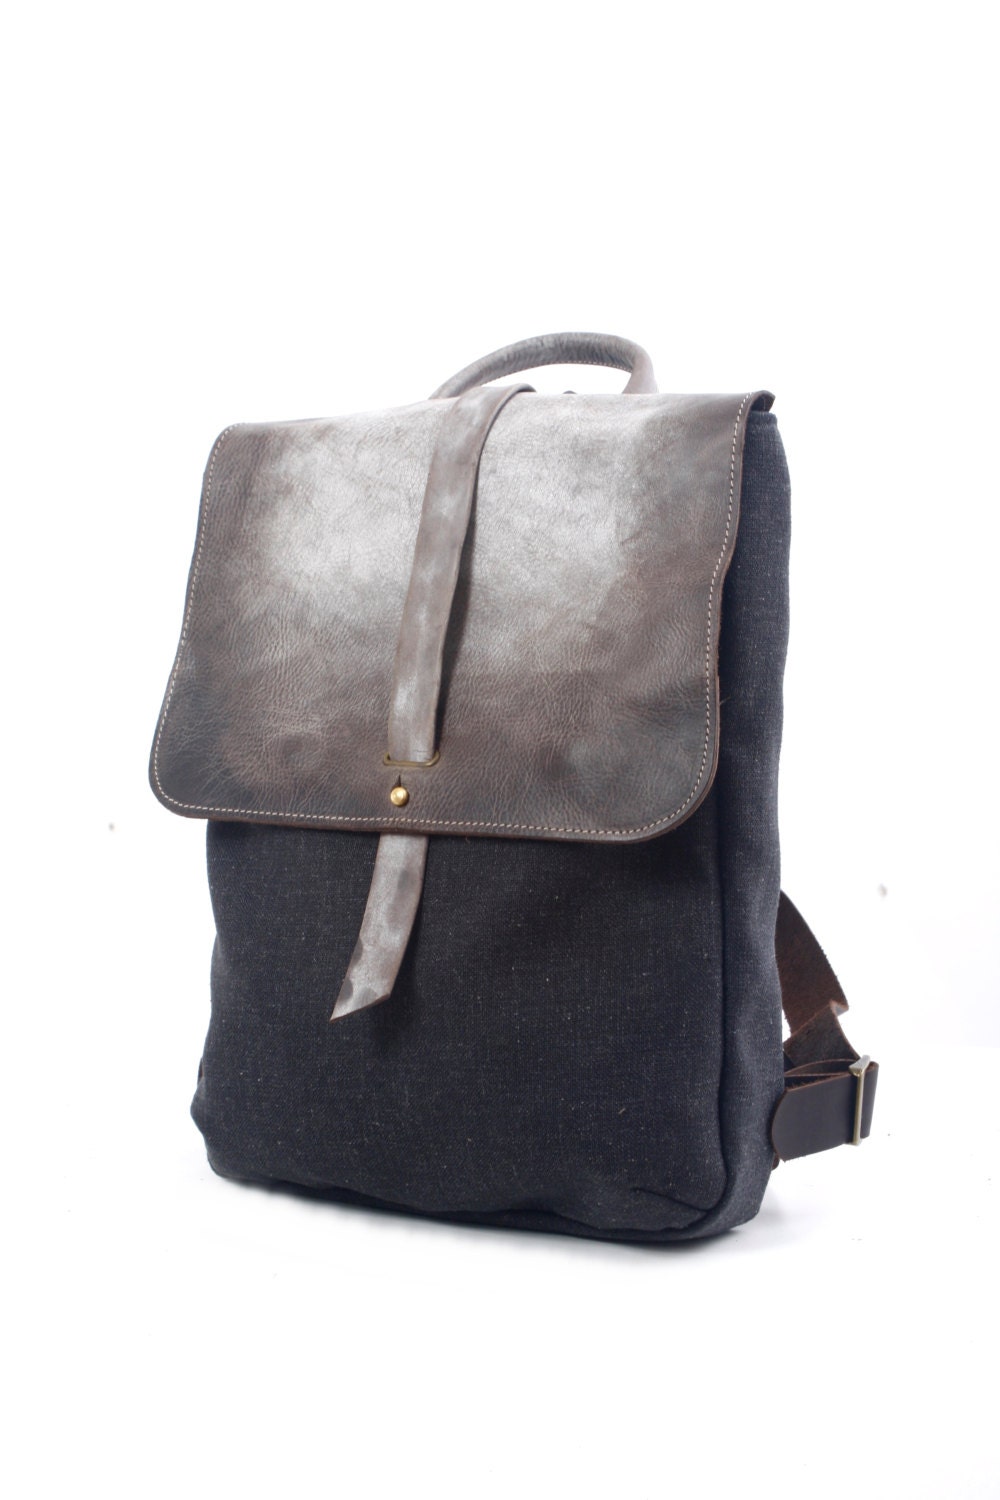 Leather Backpack Women Laptop Backpack - Etsy